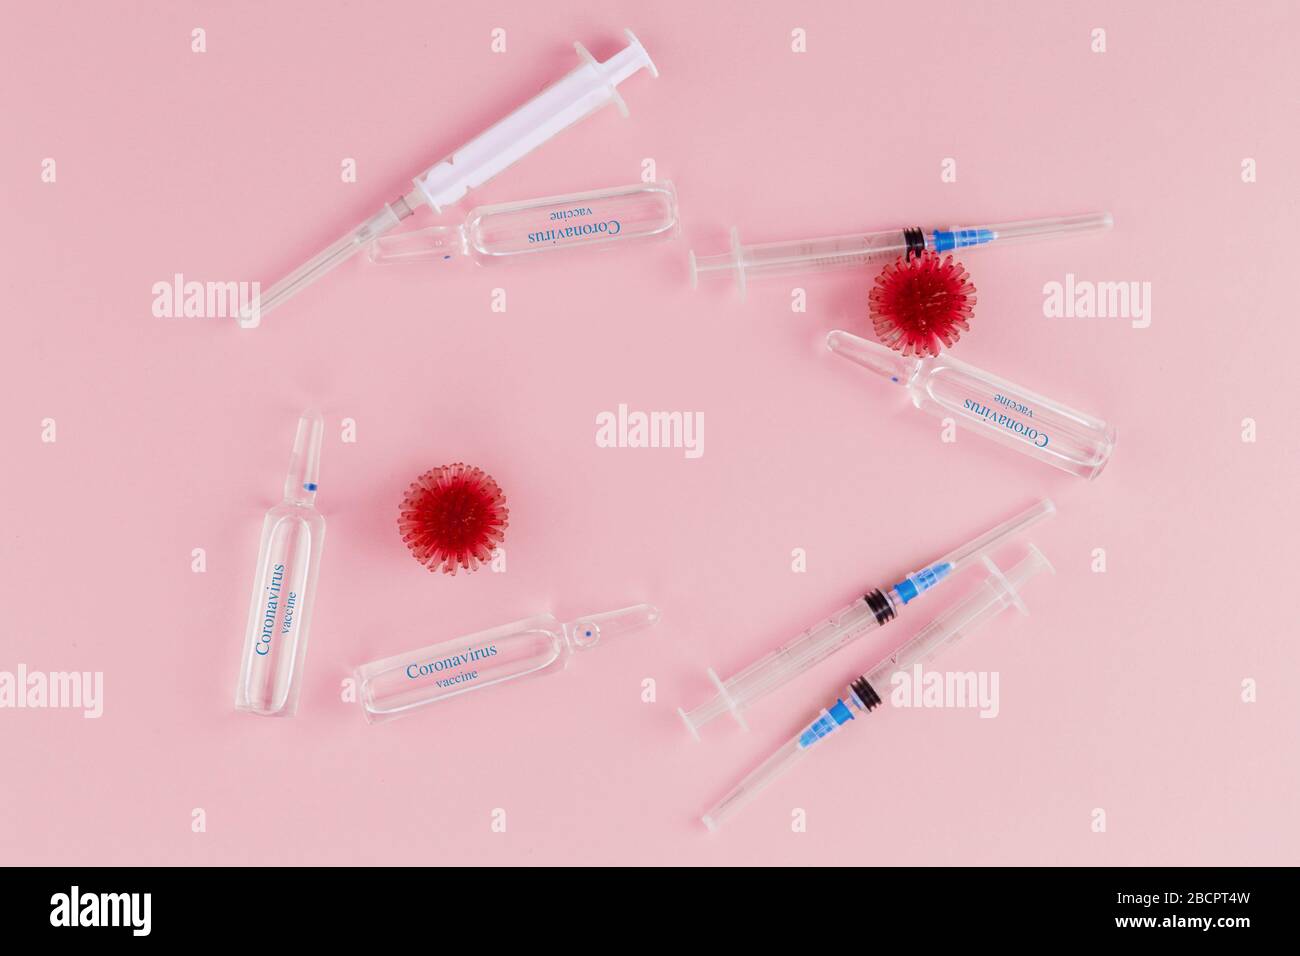 Abstract model of coronavirus infection of the strain Coronavirus. Red virus, syringe and ampoules with medicine on a pink background. On ampoules the blue inscription Coronavirus vaccine. Stock Photo